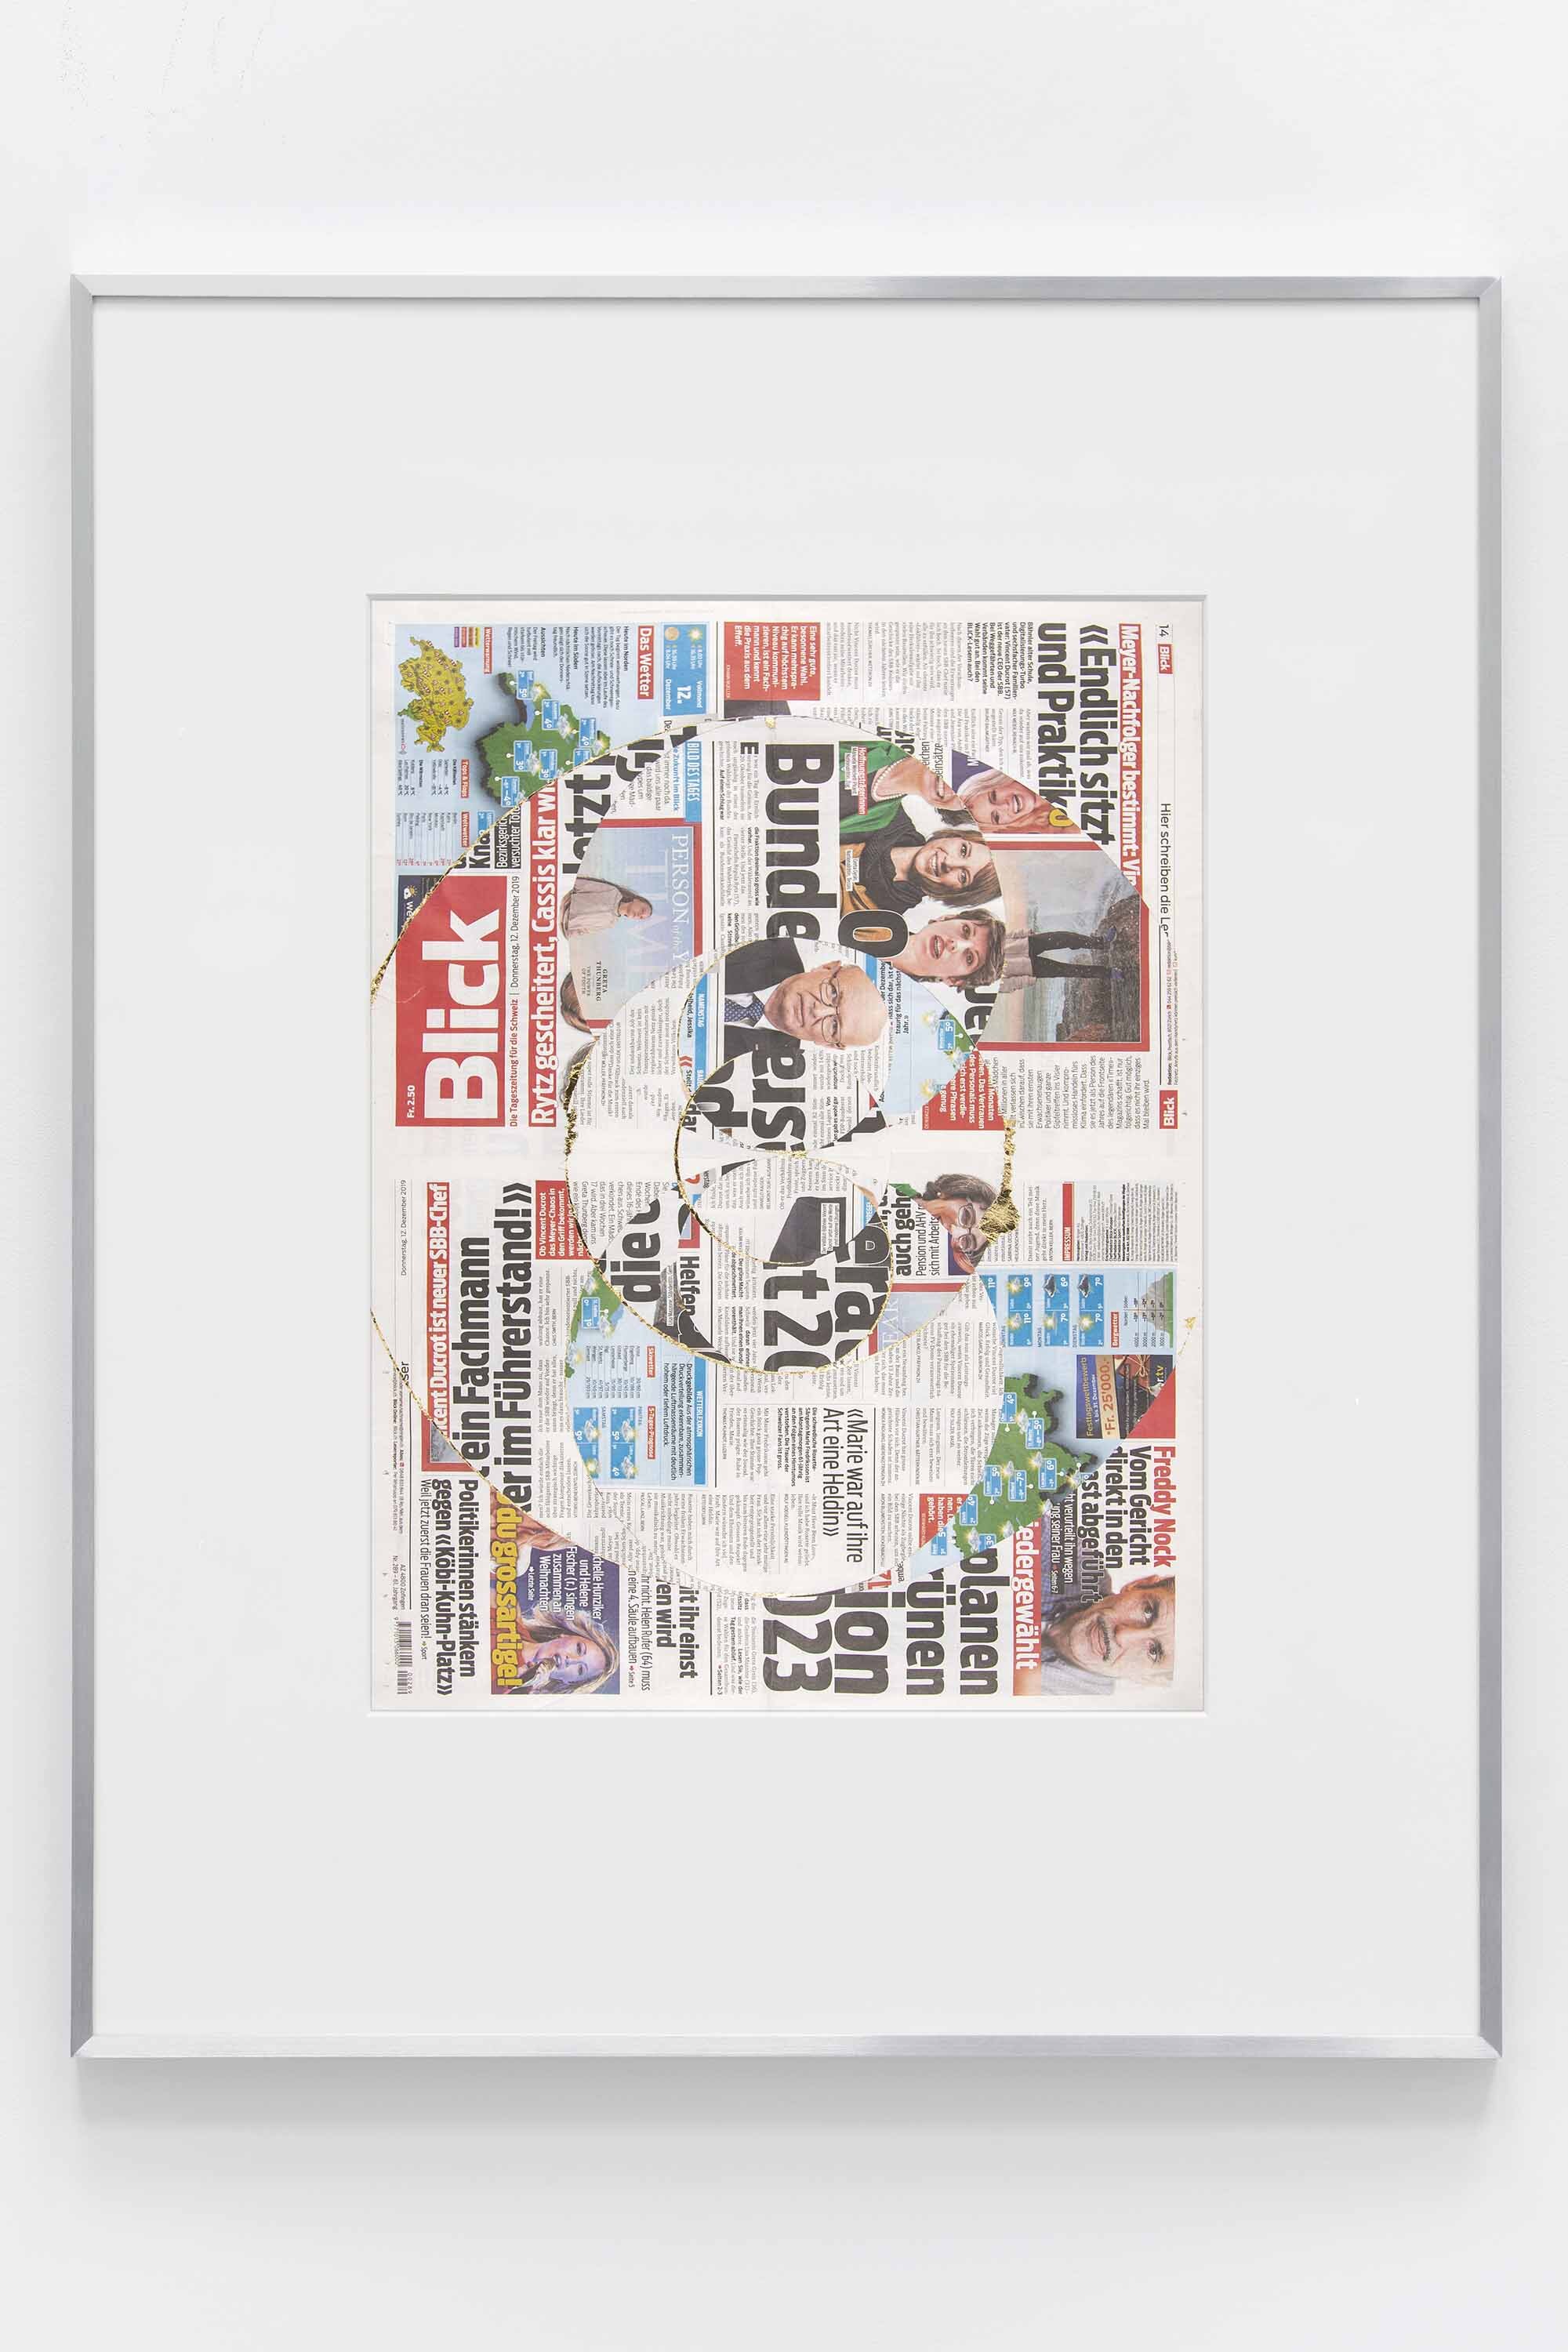   Blind Collage (Seven 180º Rotations, Blick: Zurich, Switzerland, Thursday, December 12, 2019)    2021   Newspaper, tape, and 22 karat gold leaf  39 1/8 x 31 1/4 inches  Exhibition:   Foreign Correspondence, 2021  